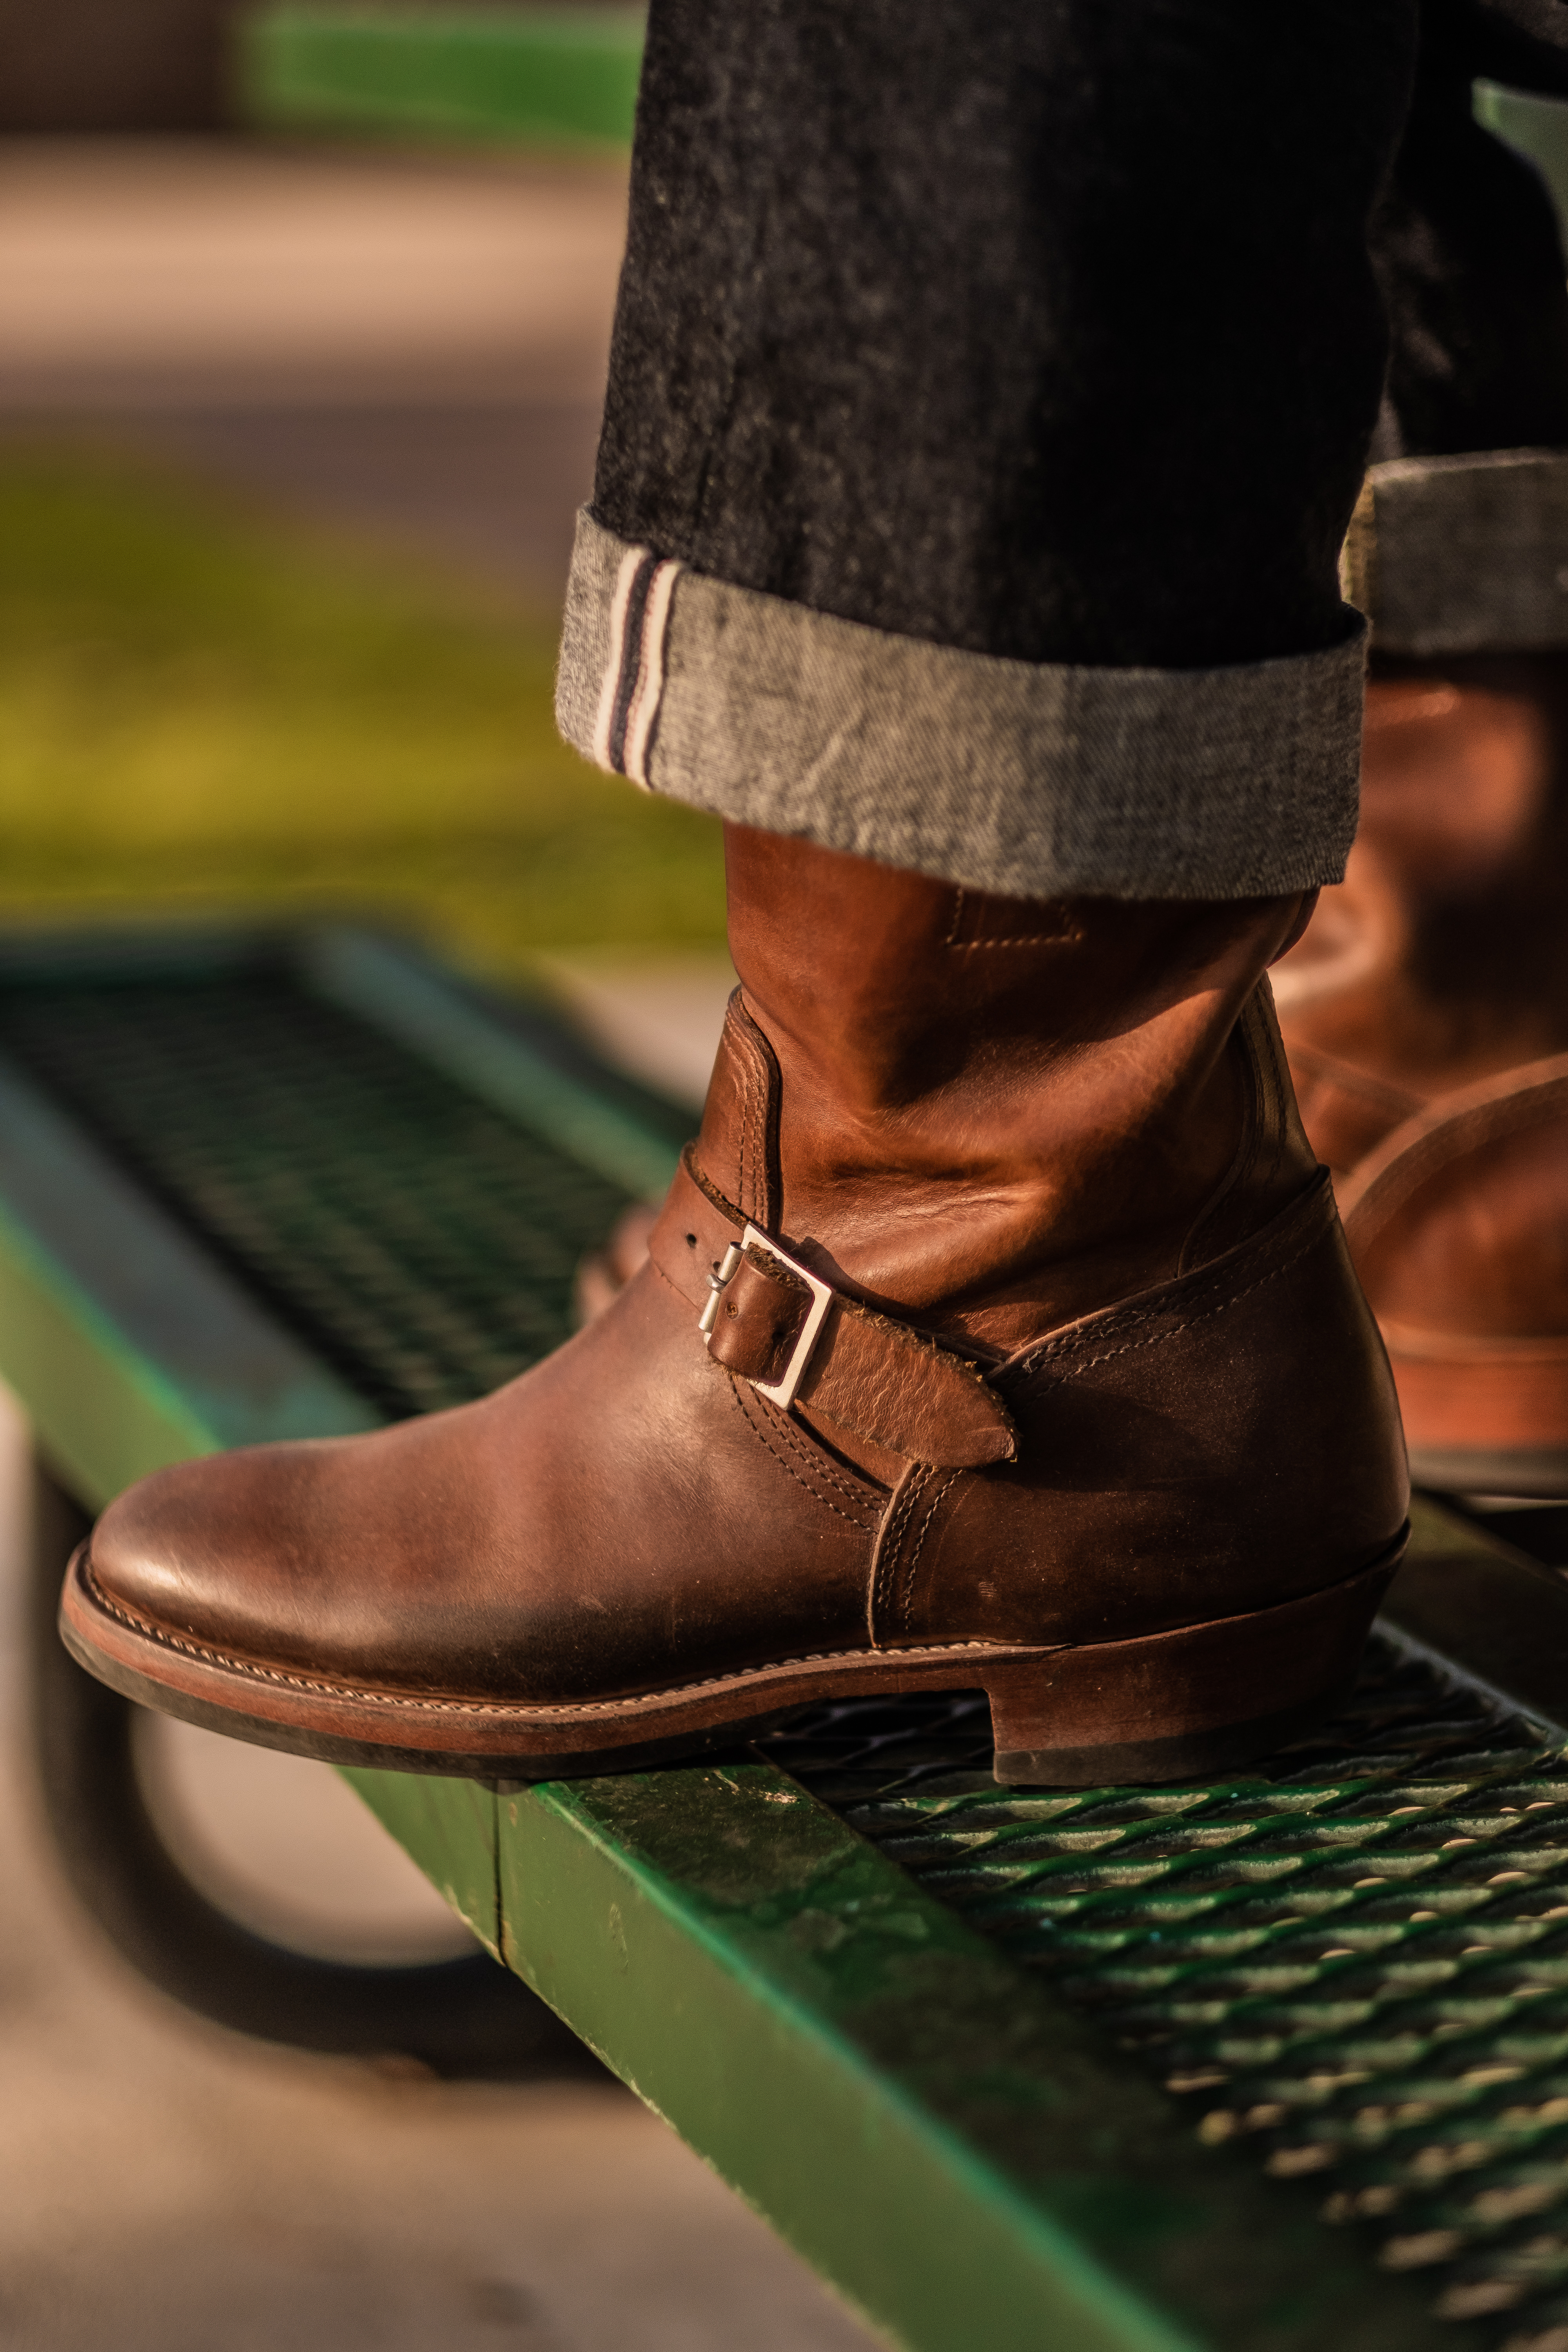 Clinch by Brass Tokyo Engineer Boots Review – Almost Vintage Style